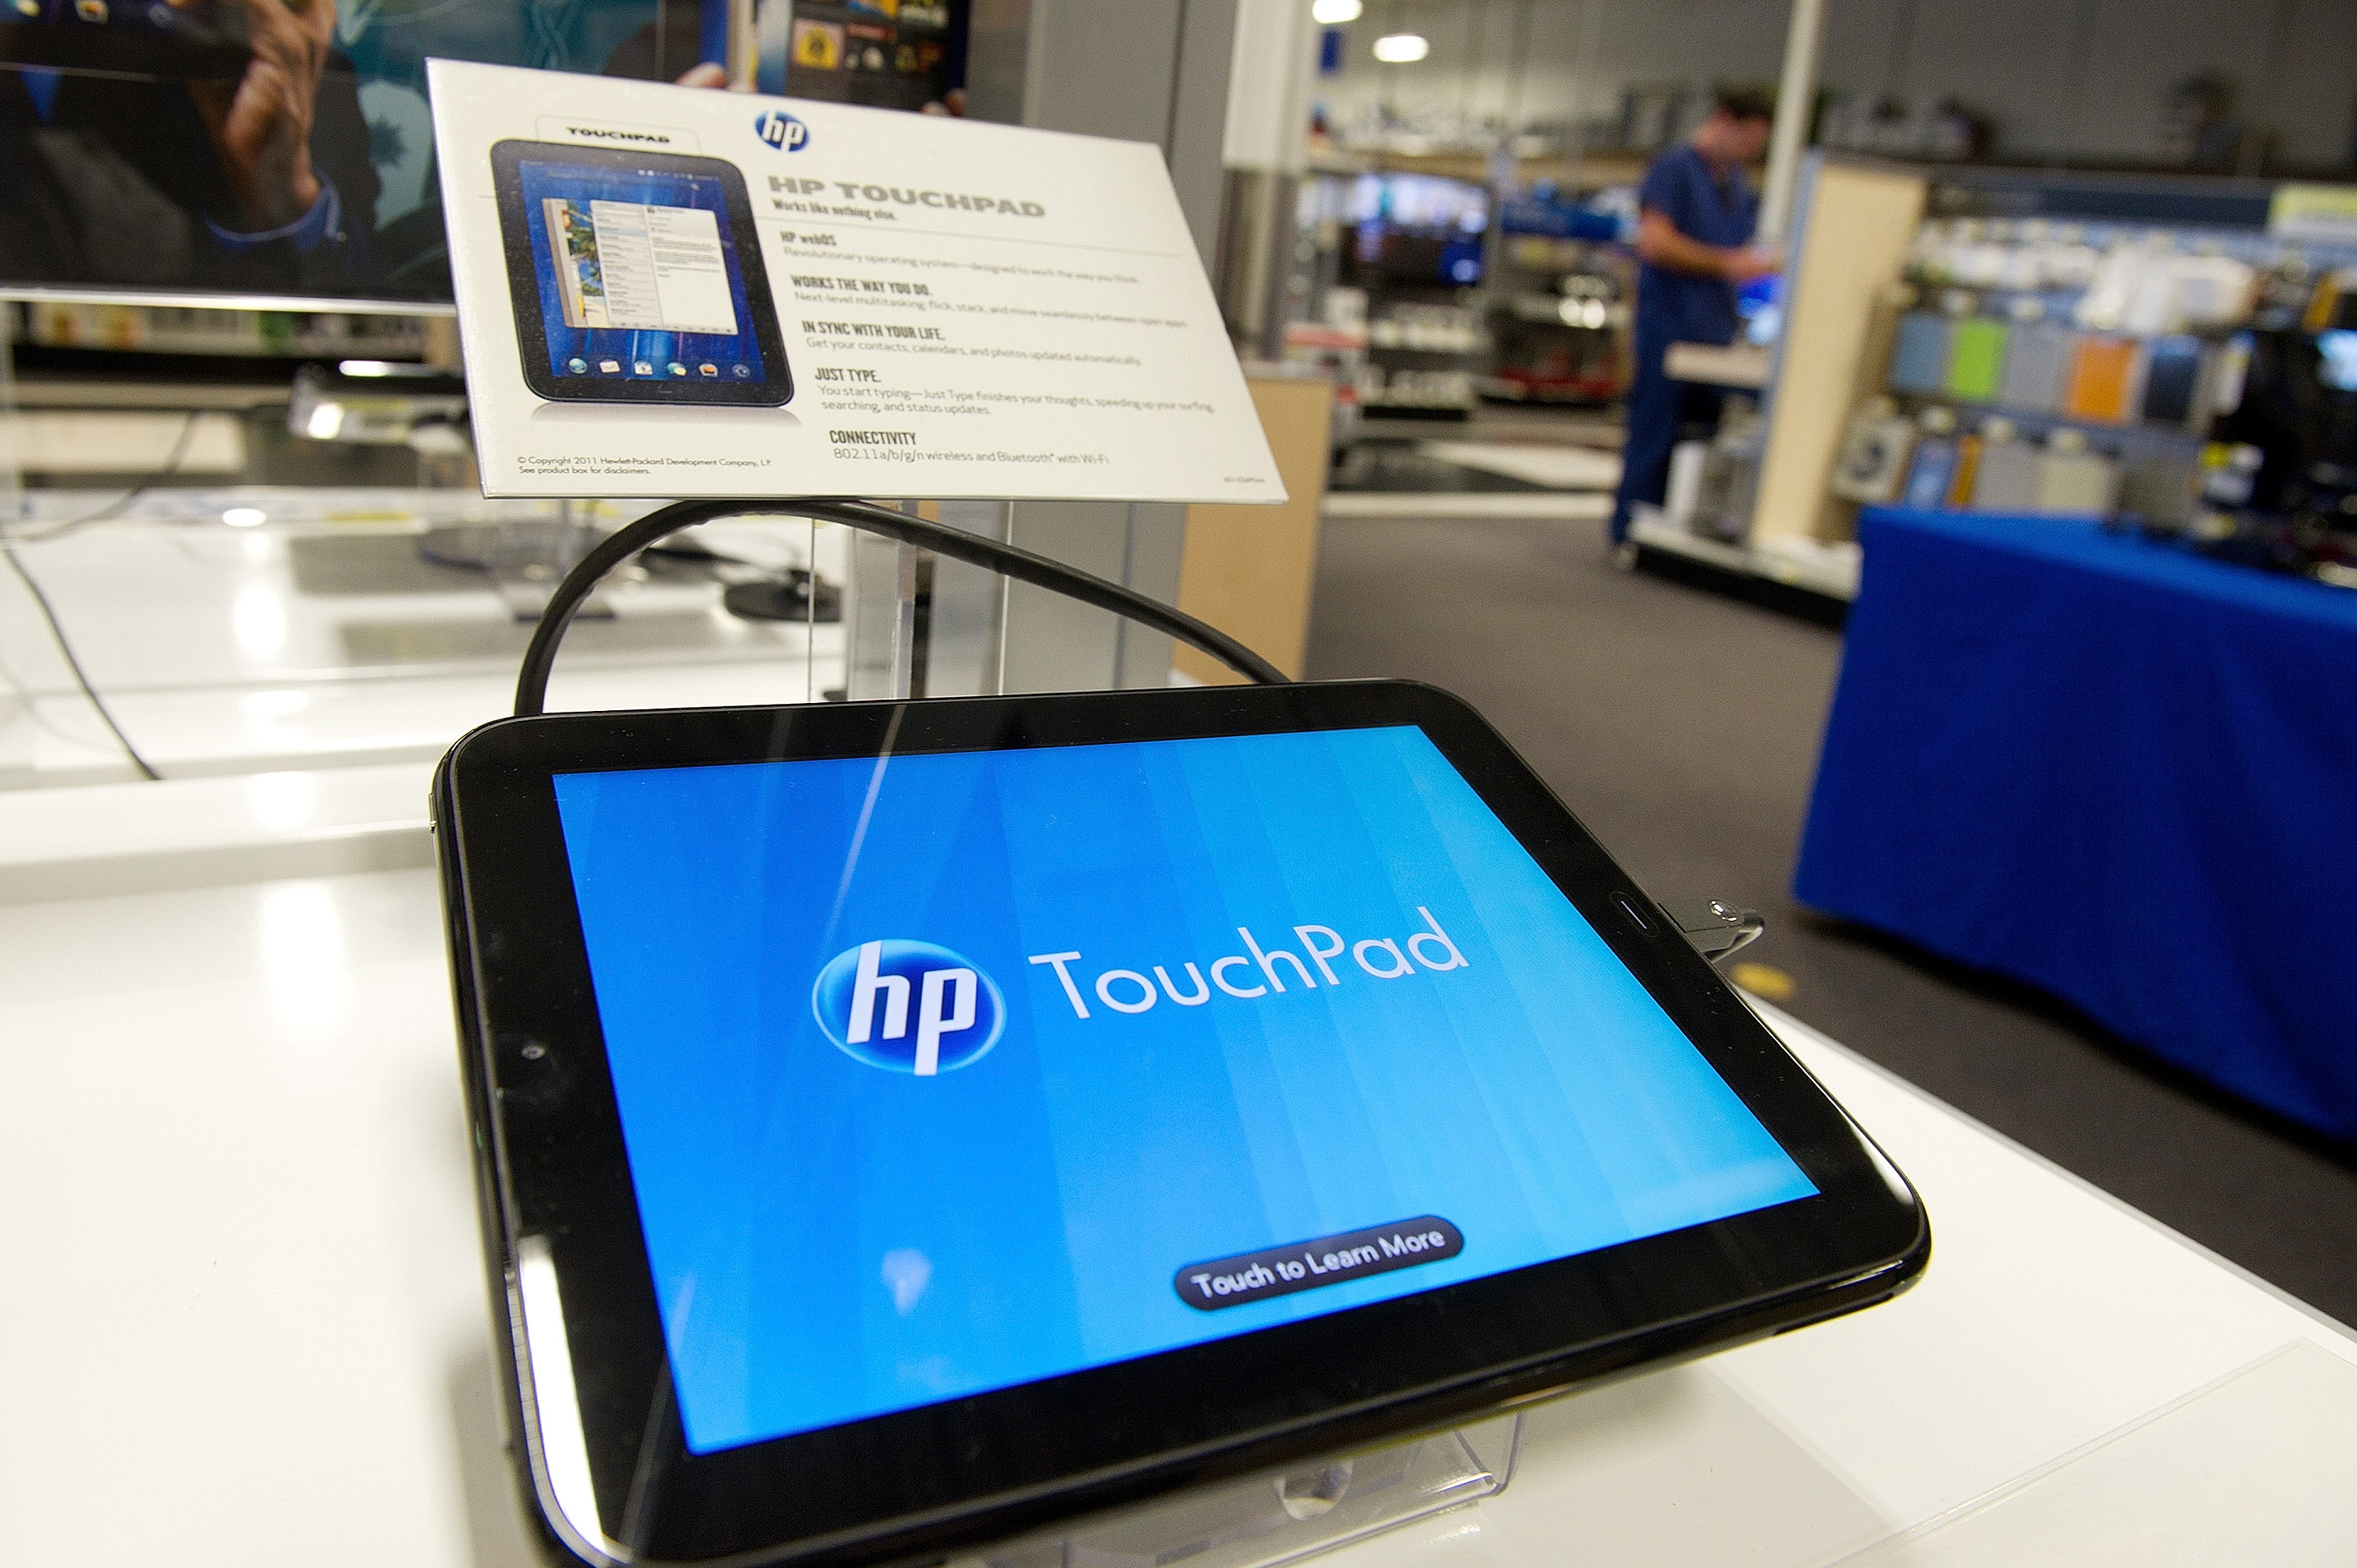 Hewlett-Packard's ill-fated TouchPad. (Bloomberg&mdash;Bloomberg via Getty Images)